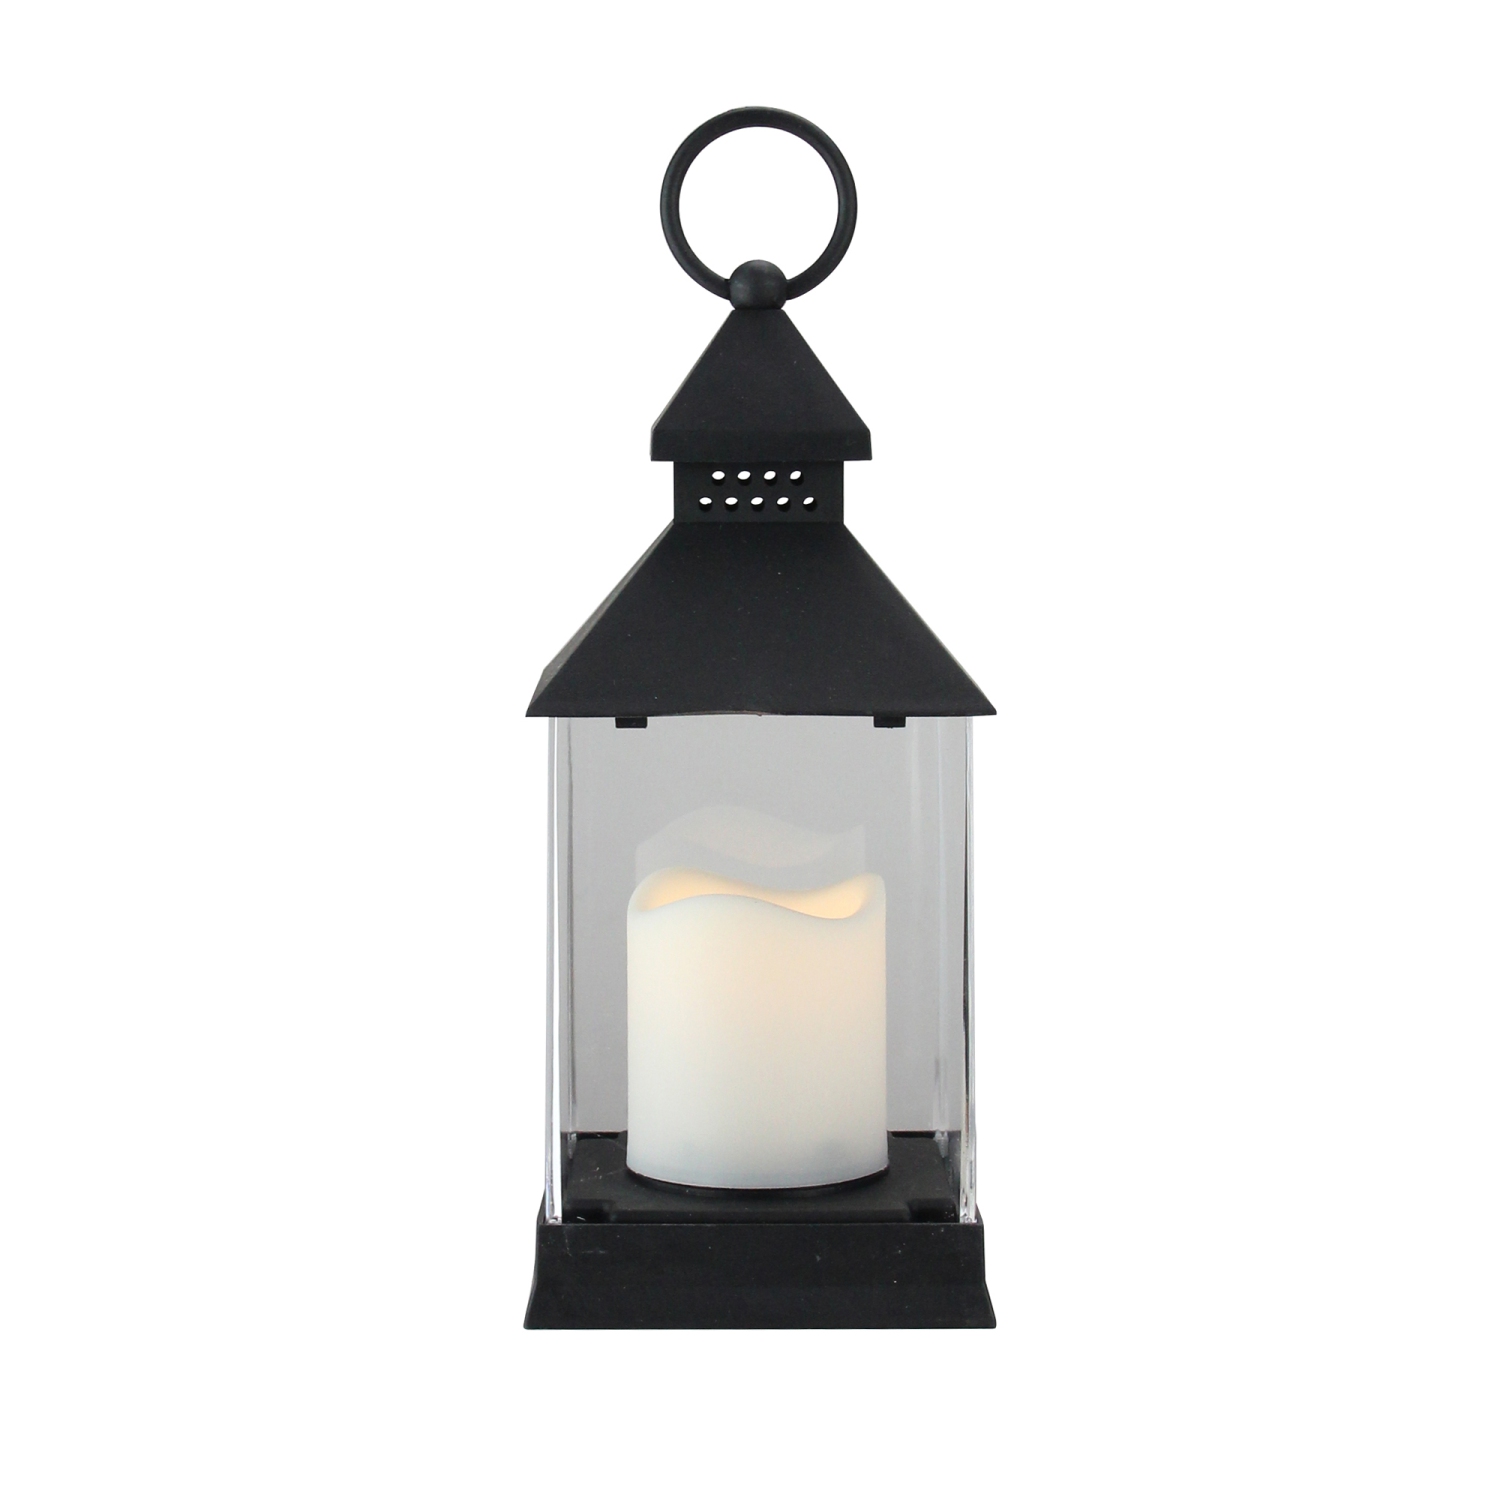 9.5" Black Candle Lantern with Flameless LED Candle Tabletop Decor